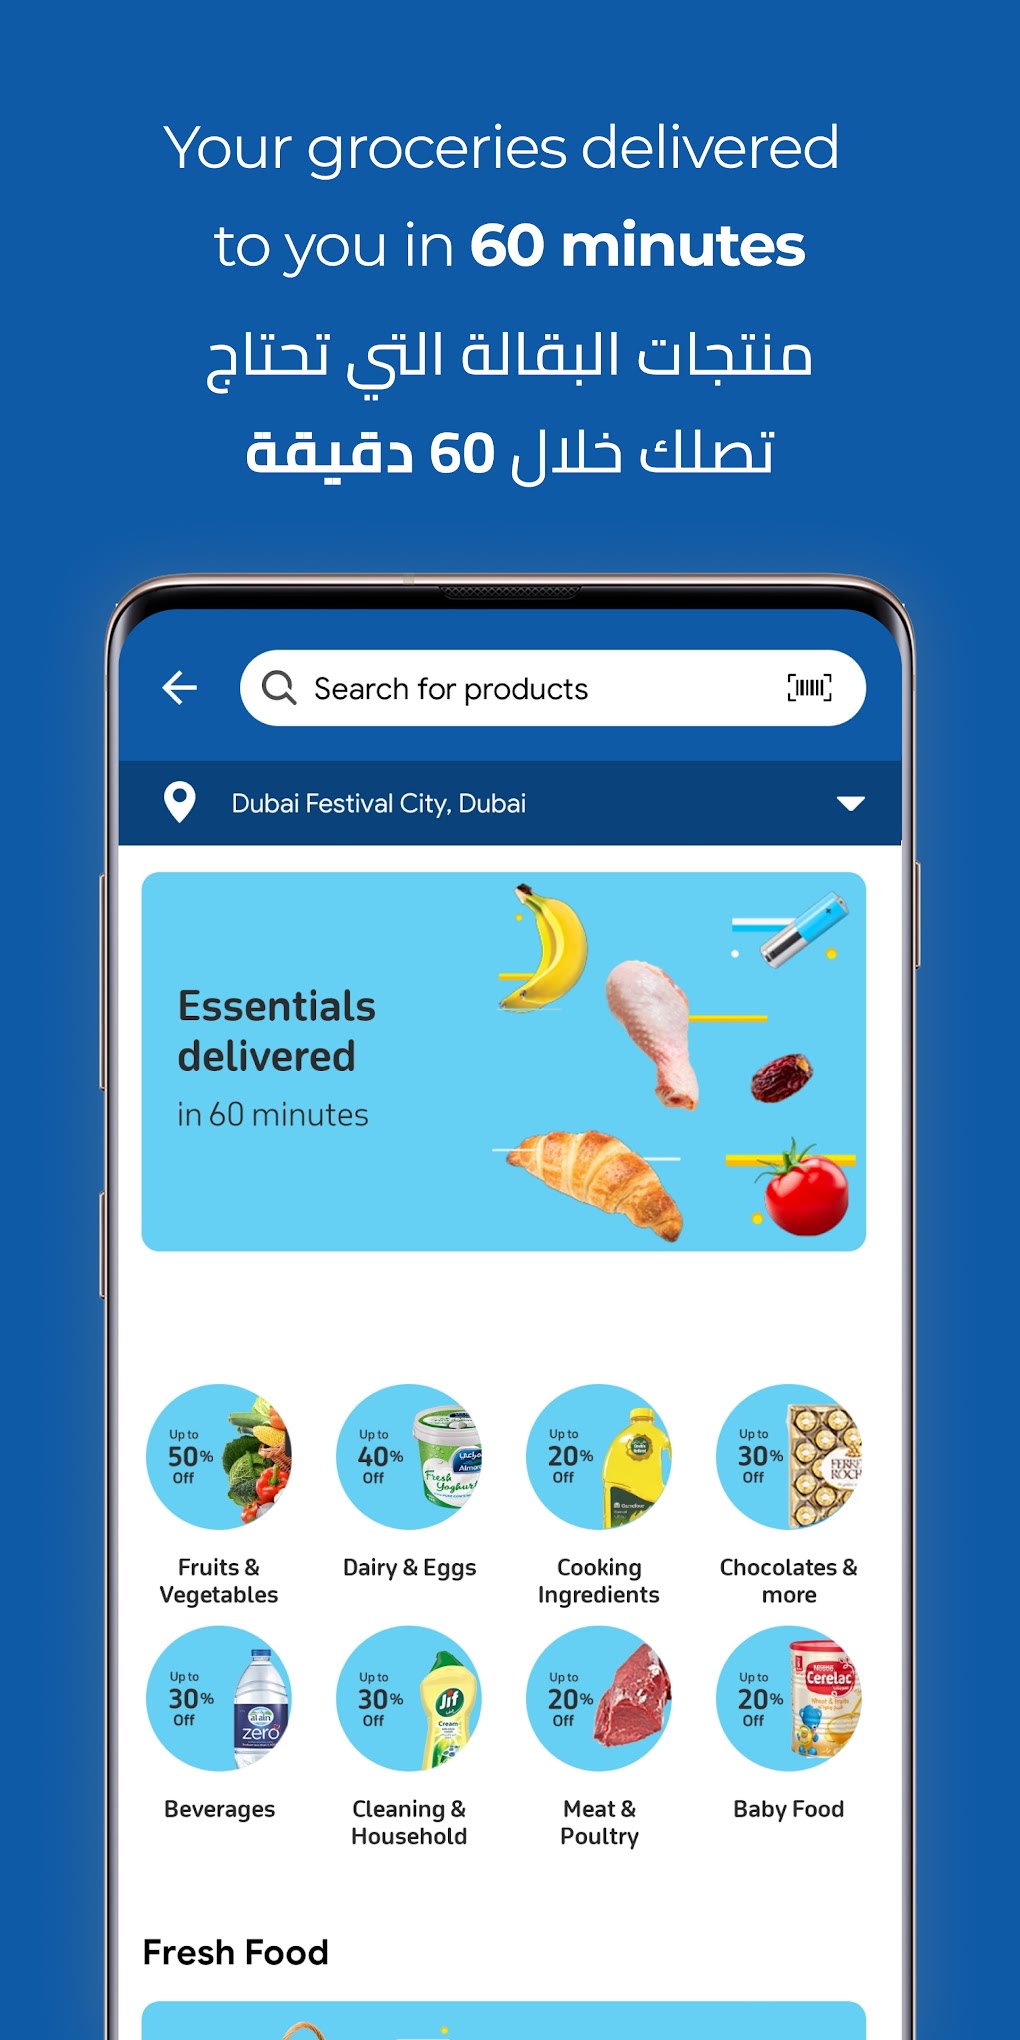 MAF Carrefour Online Shopping - Apps on Google Play